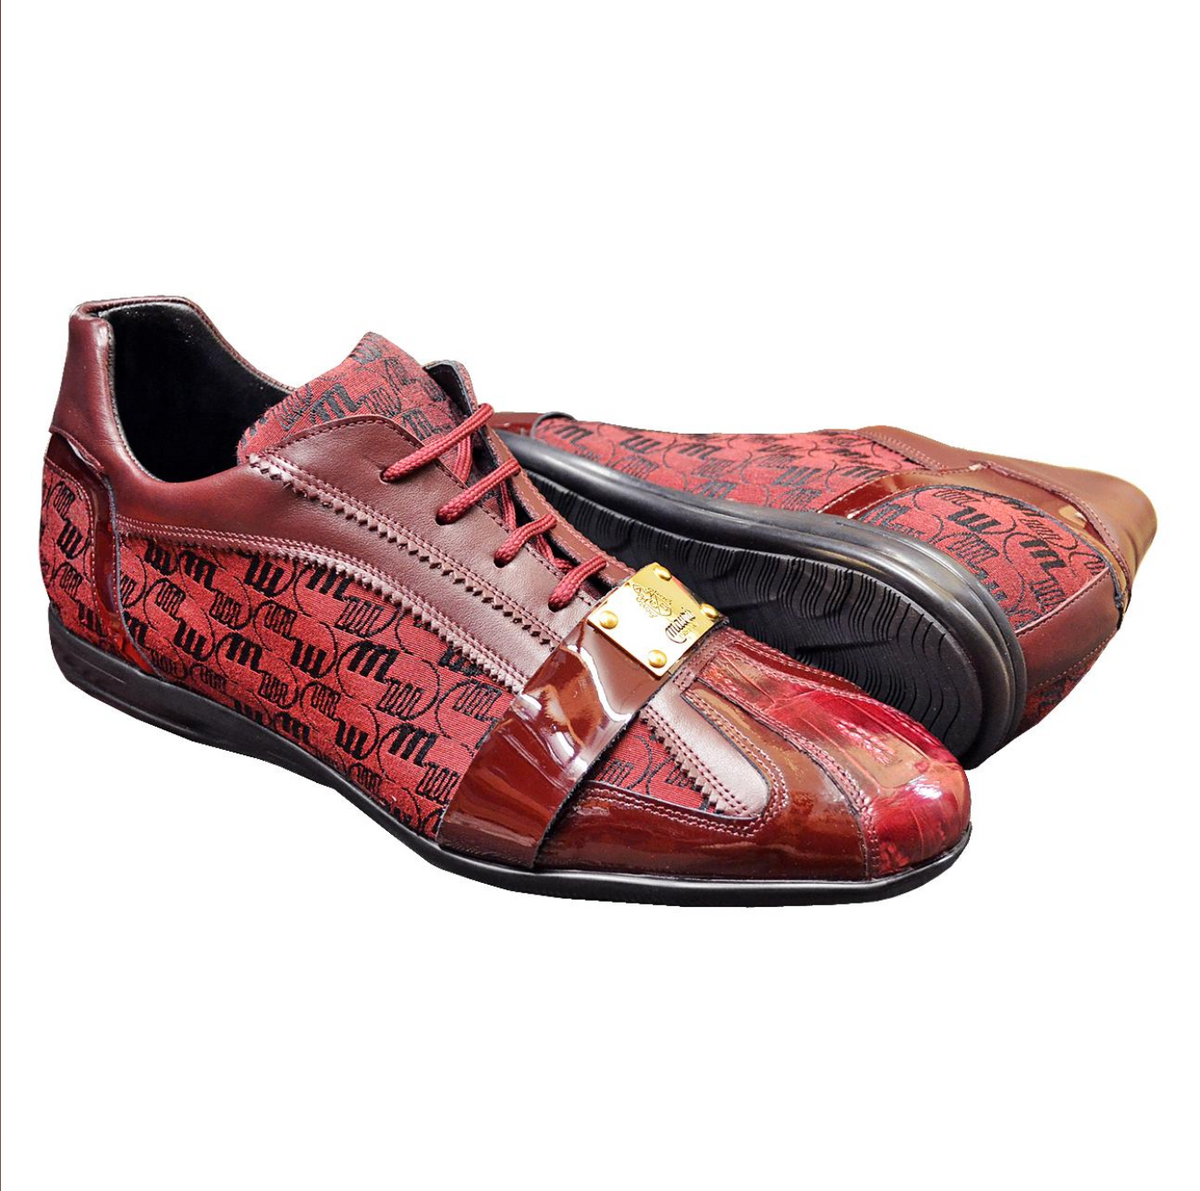 Mauri Shoes - A great combination of style and comfort these